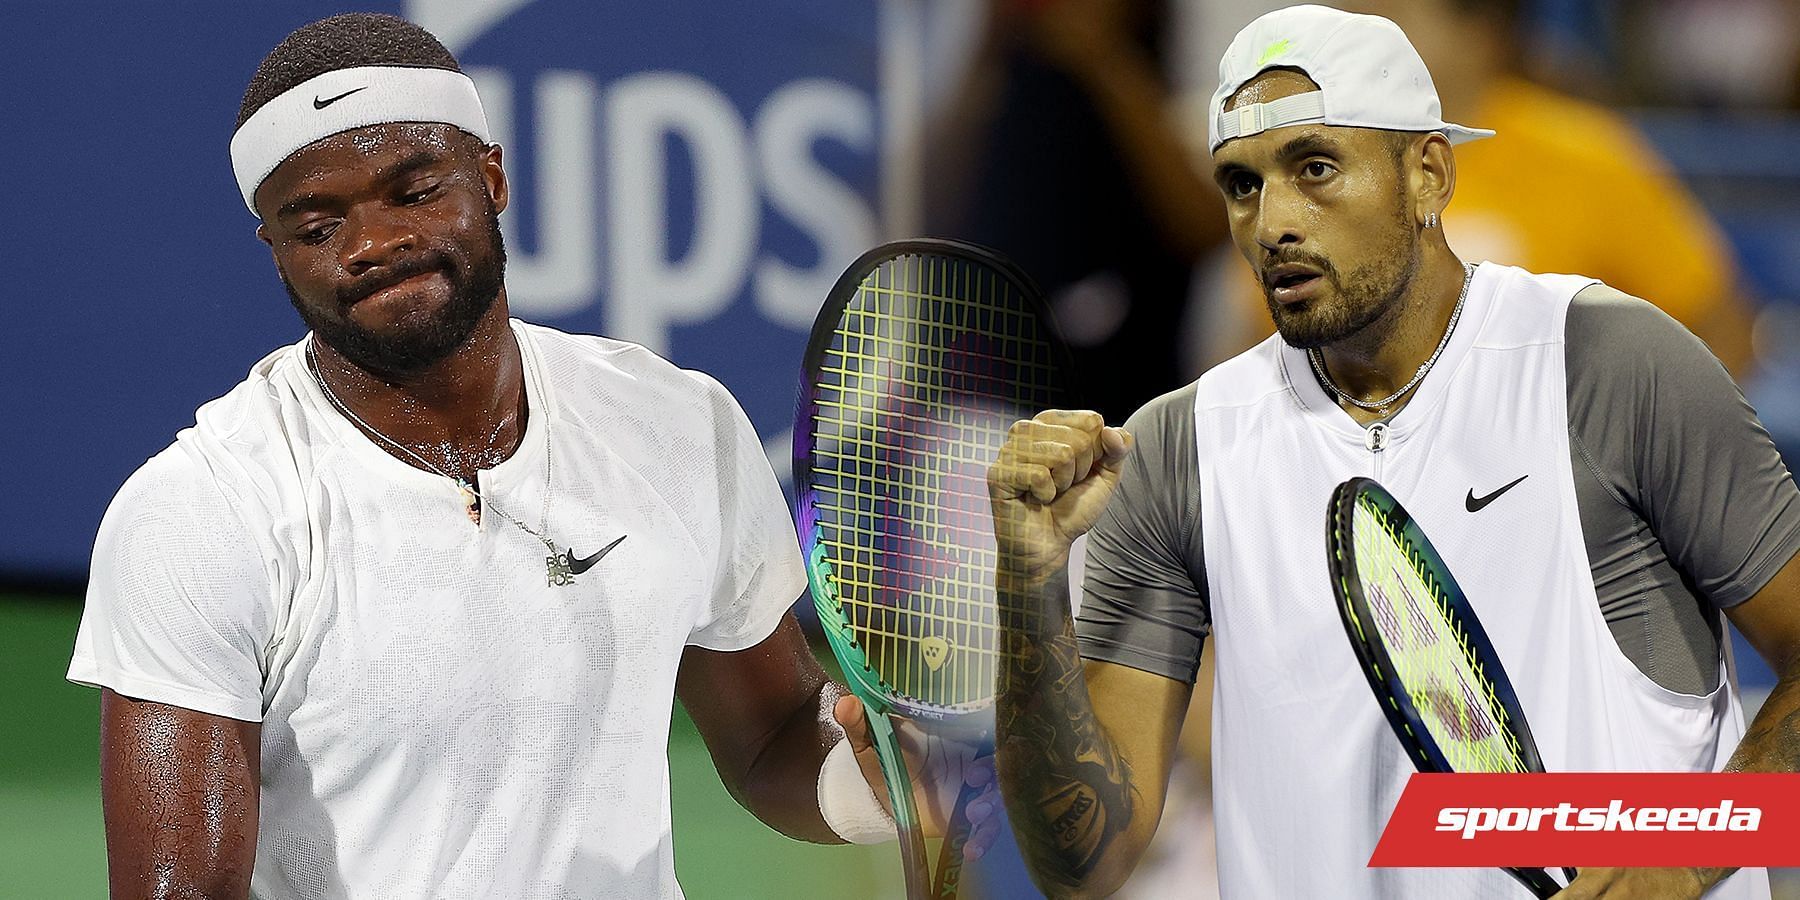 Frances Tiafoe (L) and Nick Kyrgios met for the first time.